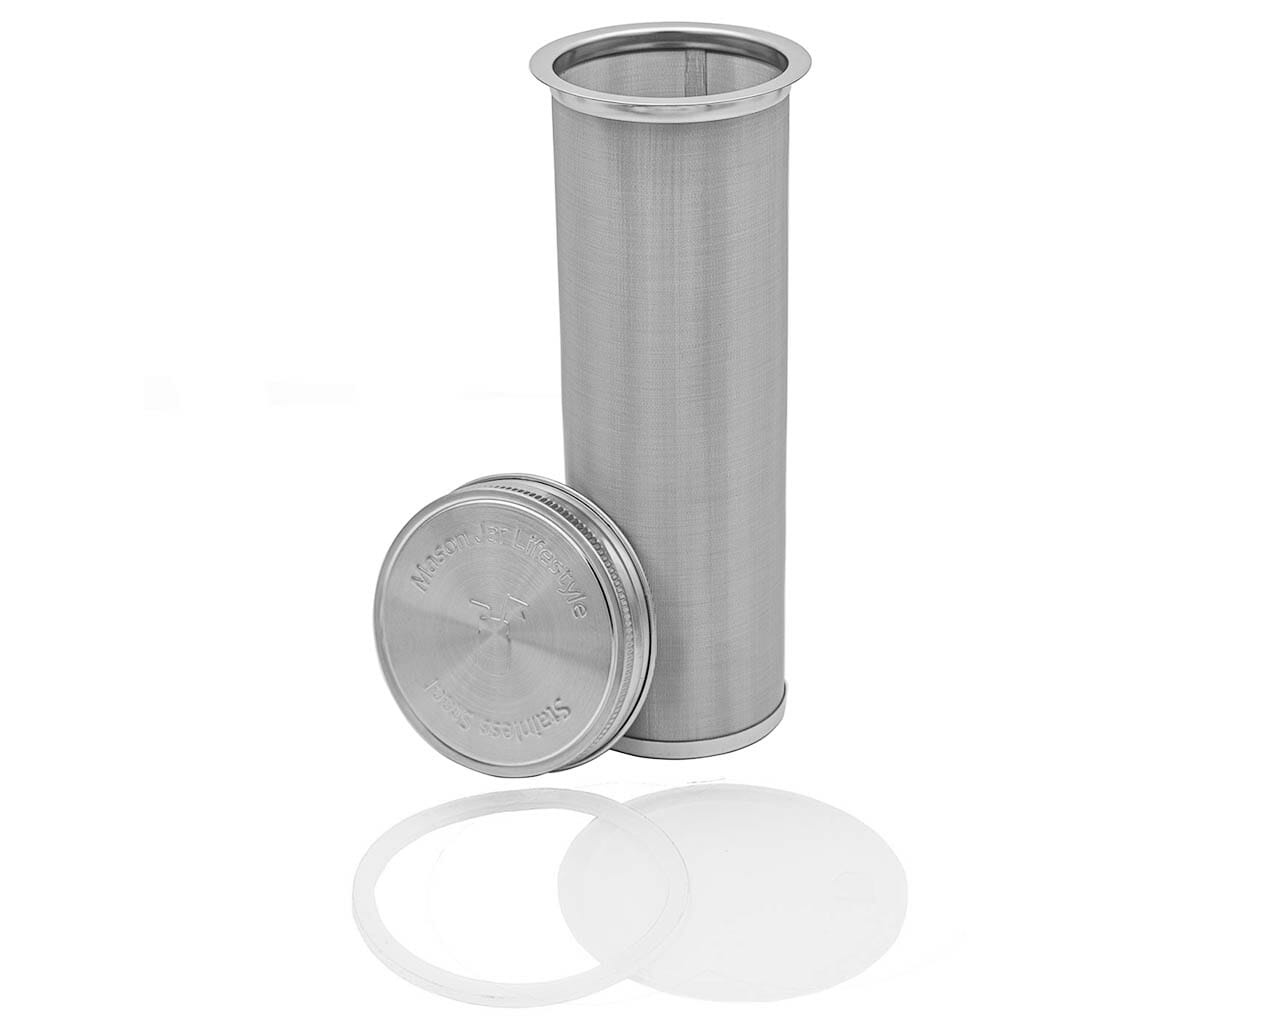 https://masonjarlifestyle.com/cdn/shop/files/mason-jar-lifestyle-half-gallon-64oz-cold-brew-coffee-tea-filter-maker-wide-mouth-stainless-steel-lid-silicone-sealing-ring-liner.jpg?v=1695766423&width=1280